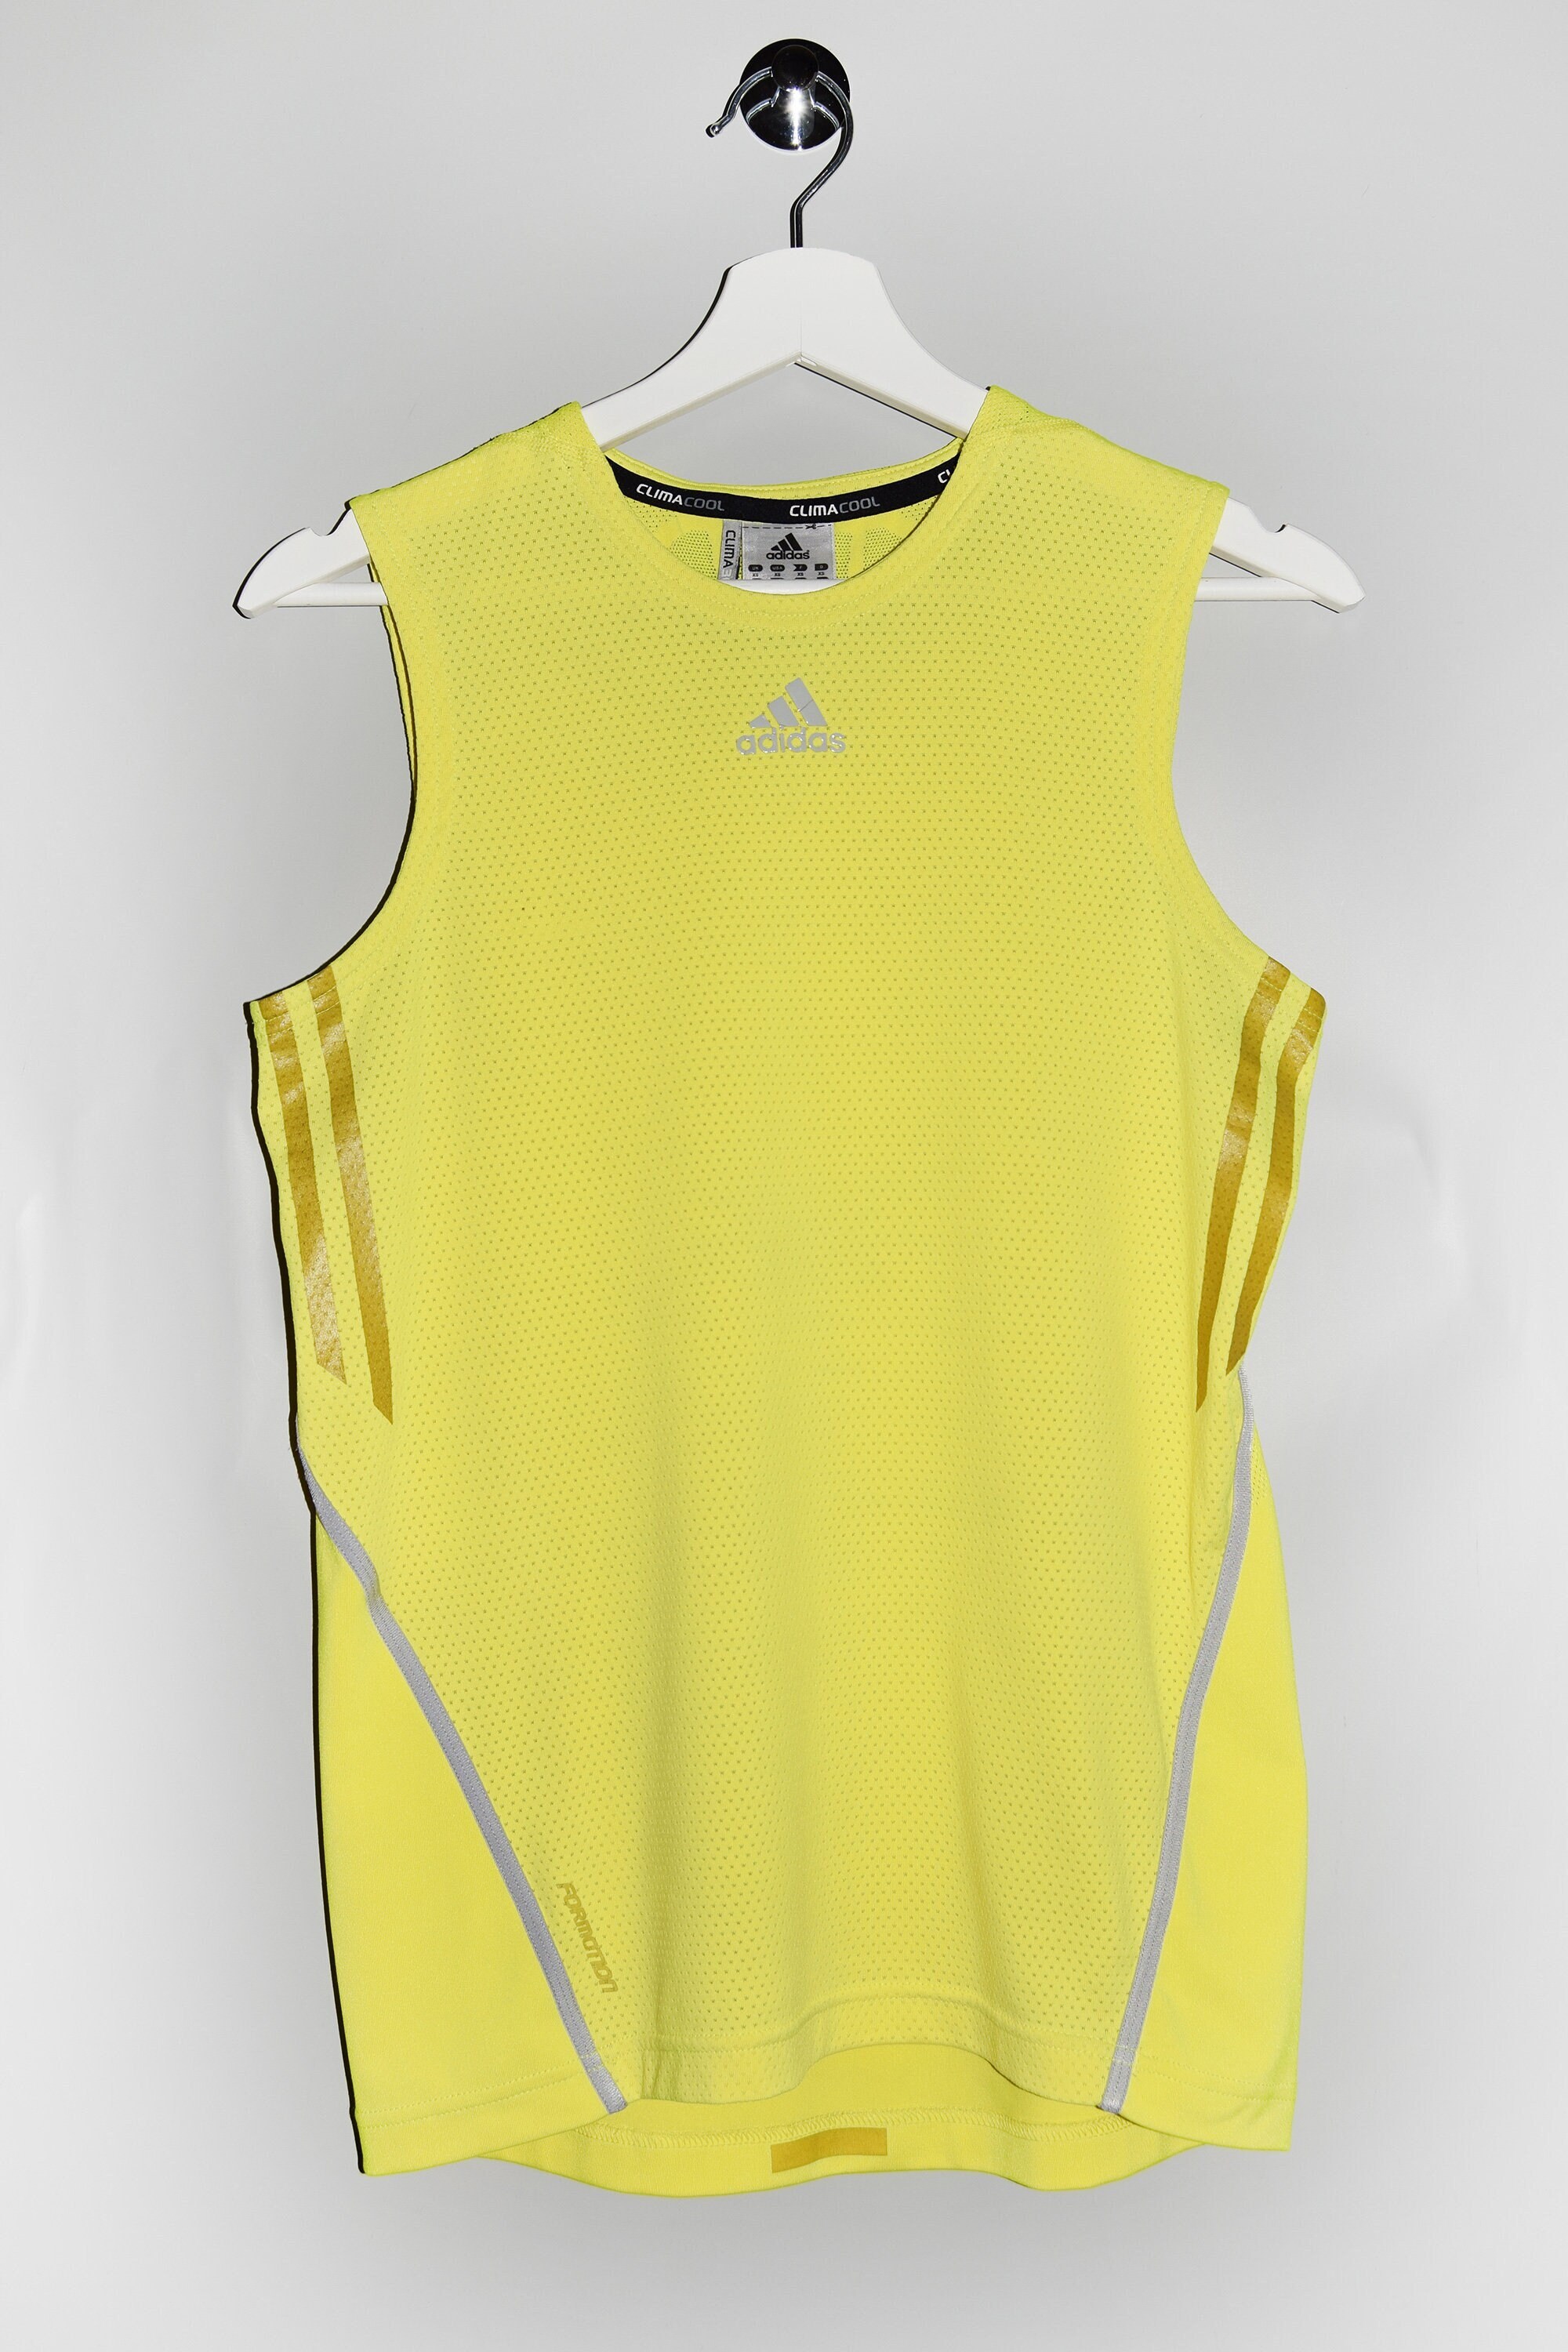 Sport Top in Bright Yellow Etsy